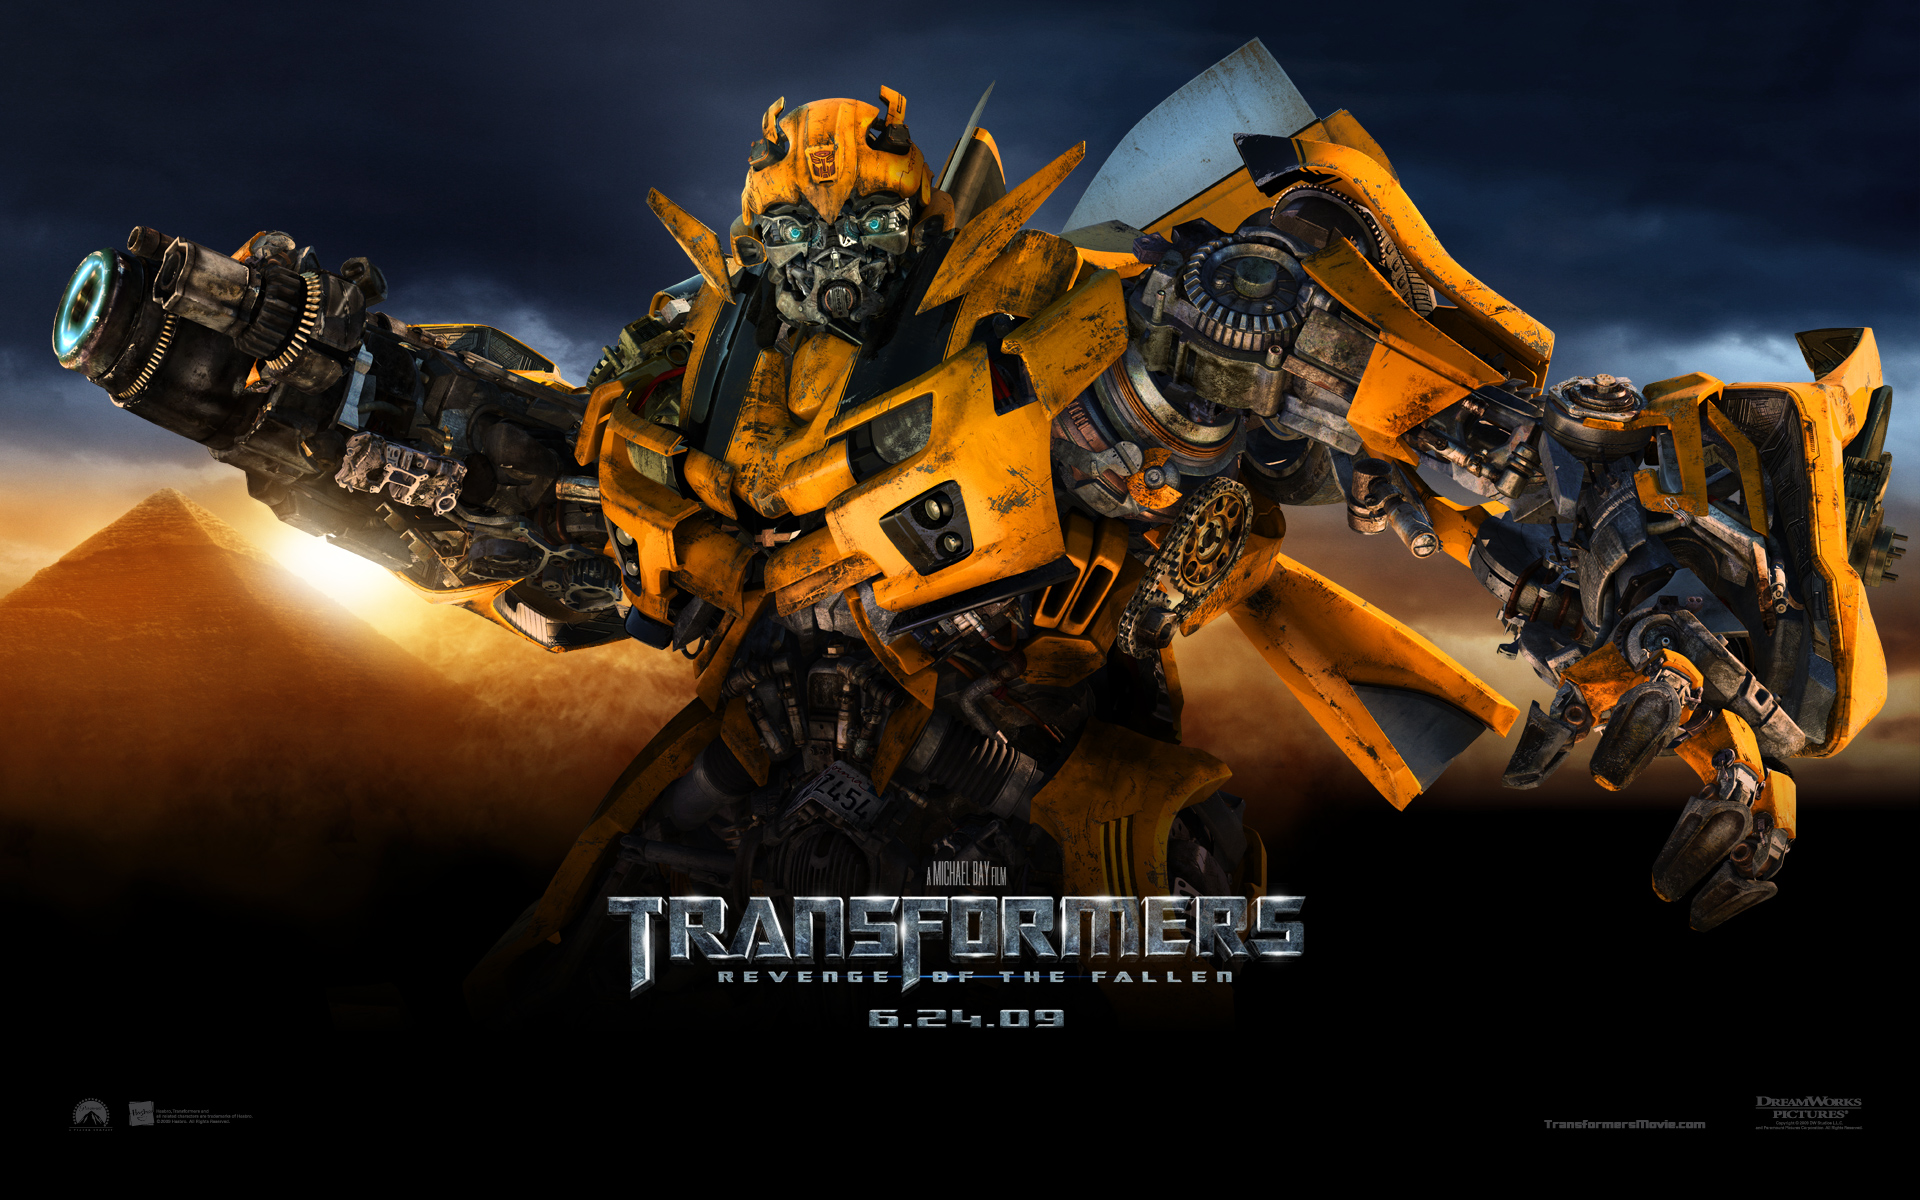 50+ Bumblebee (Transformers) HD Wallpapers and Backgrounds